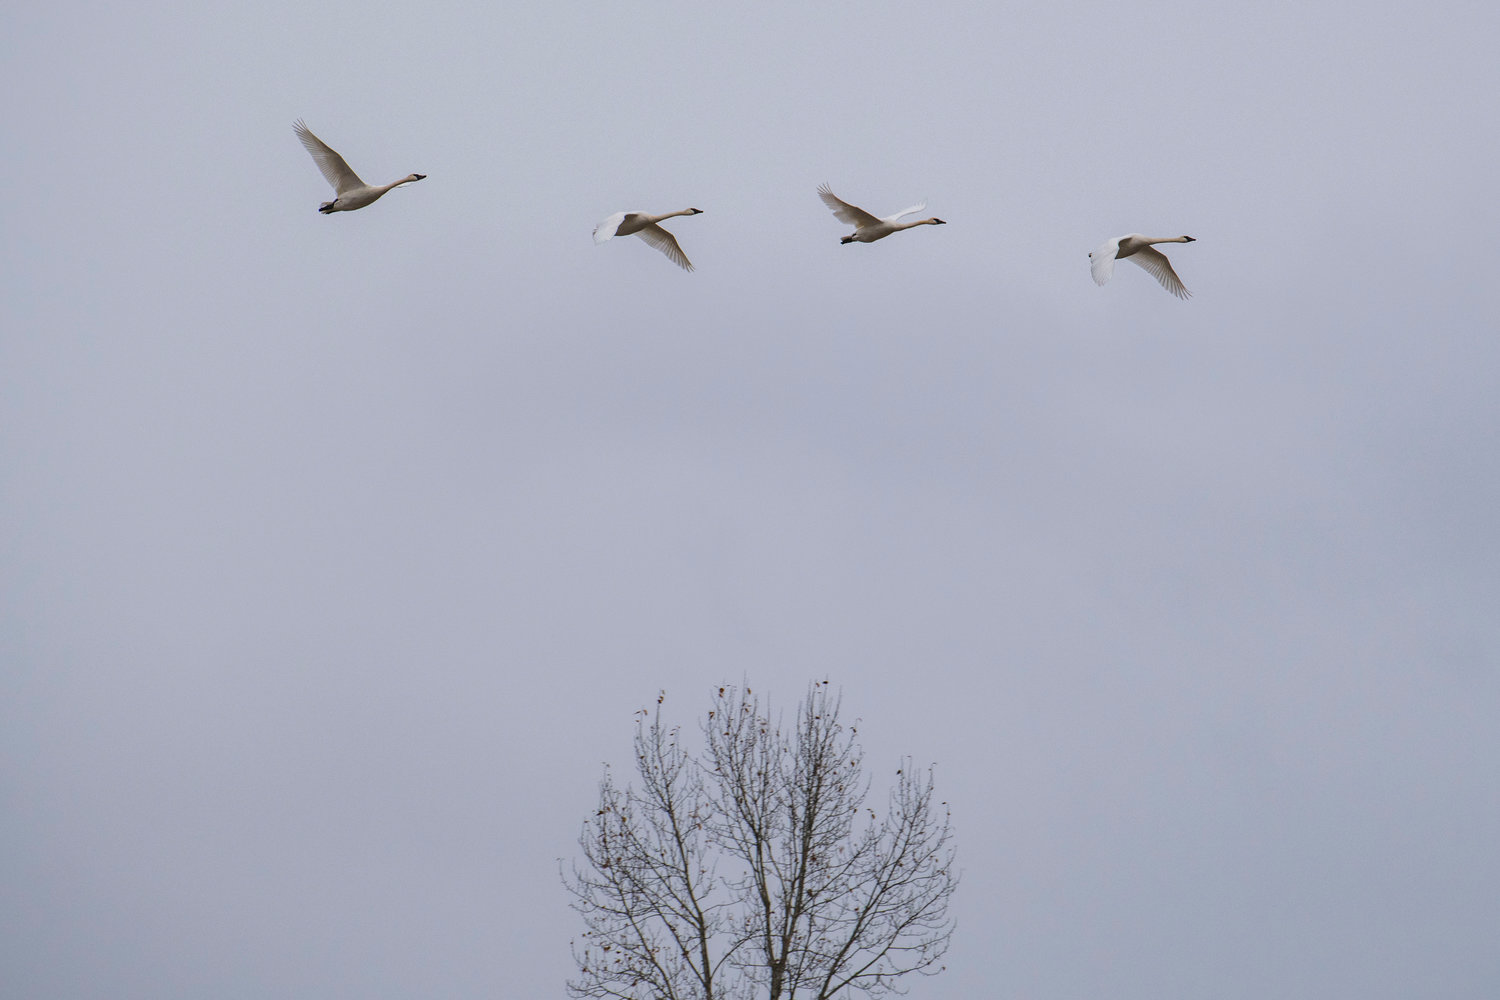 Four trumpeter swans soar above the treetops over the Willapa Hills Trail in Chehalis on Friday afternoon.